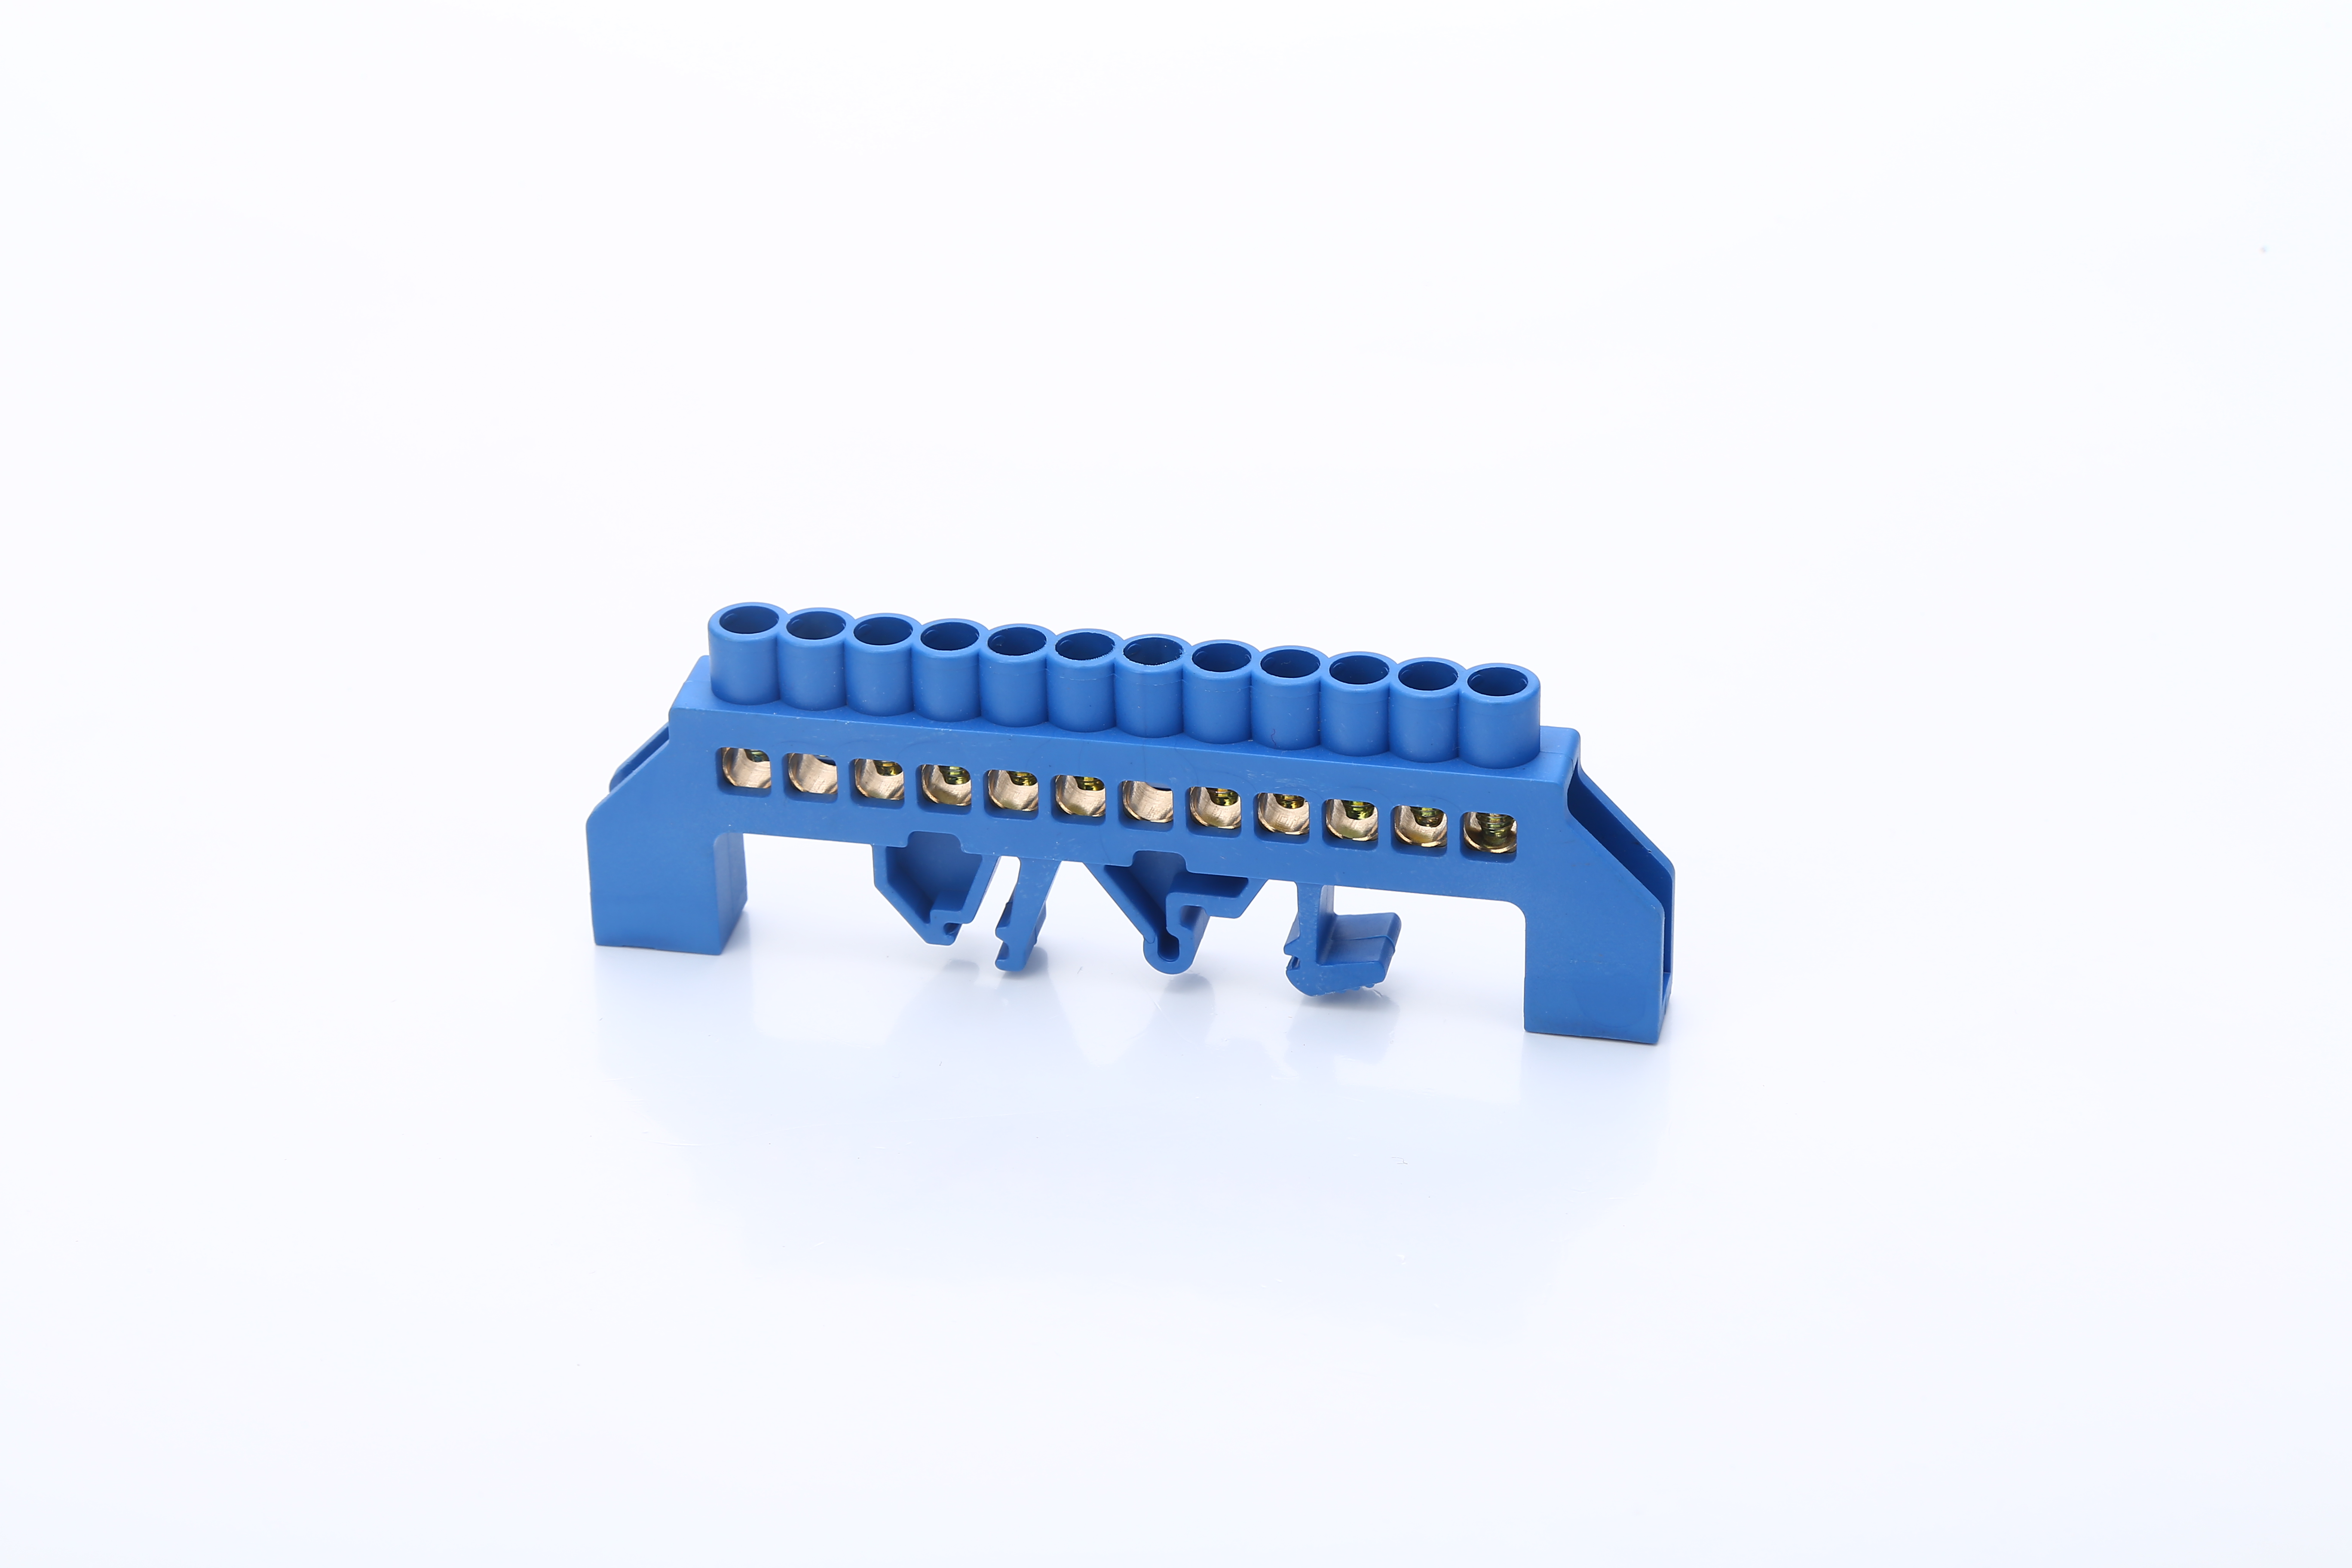 Blue 12 Positions Screw Terminal Block Connector Strip Electrical Distribution Wire Screw Brass Terminal 